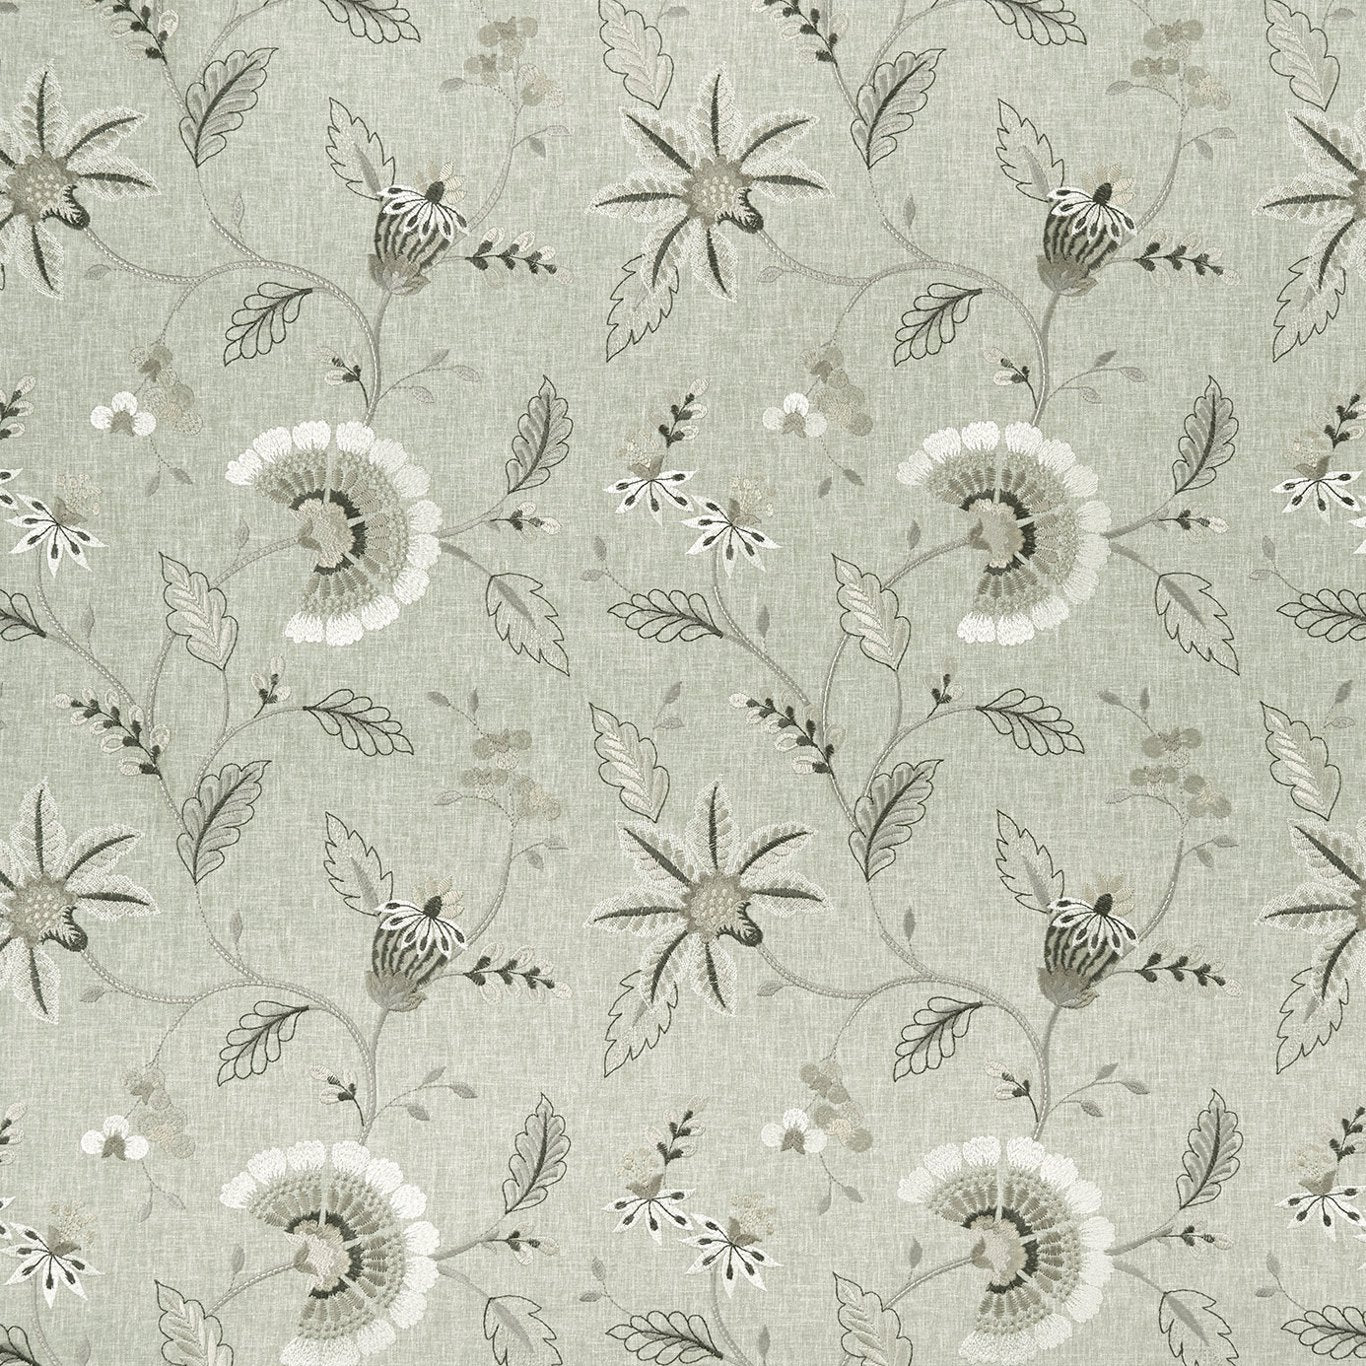 Delamere Fabric by Clarke & Clarke - F1004/04 - Natural